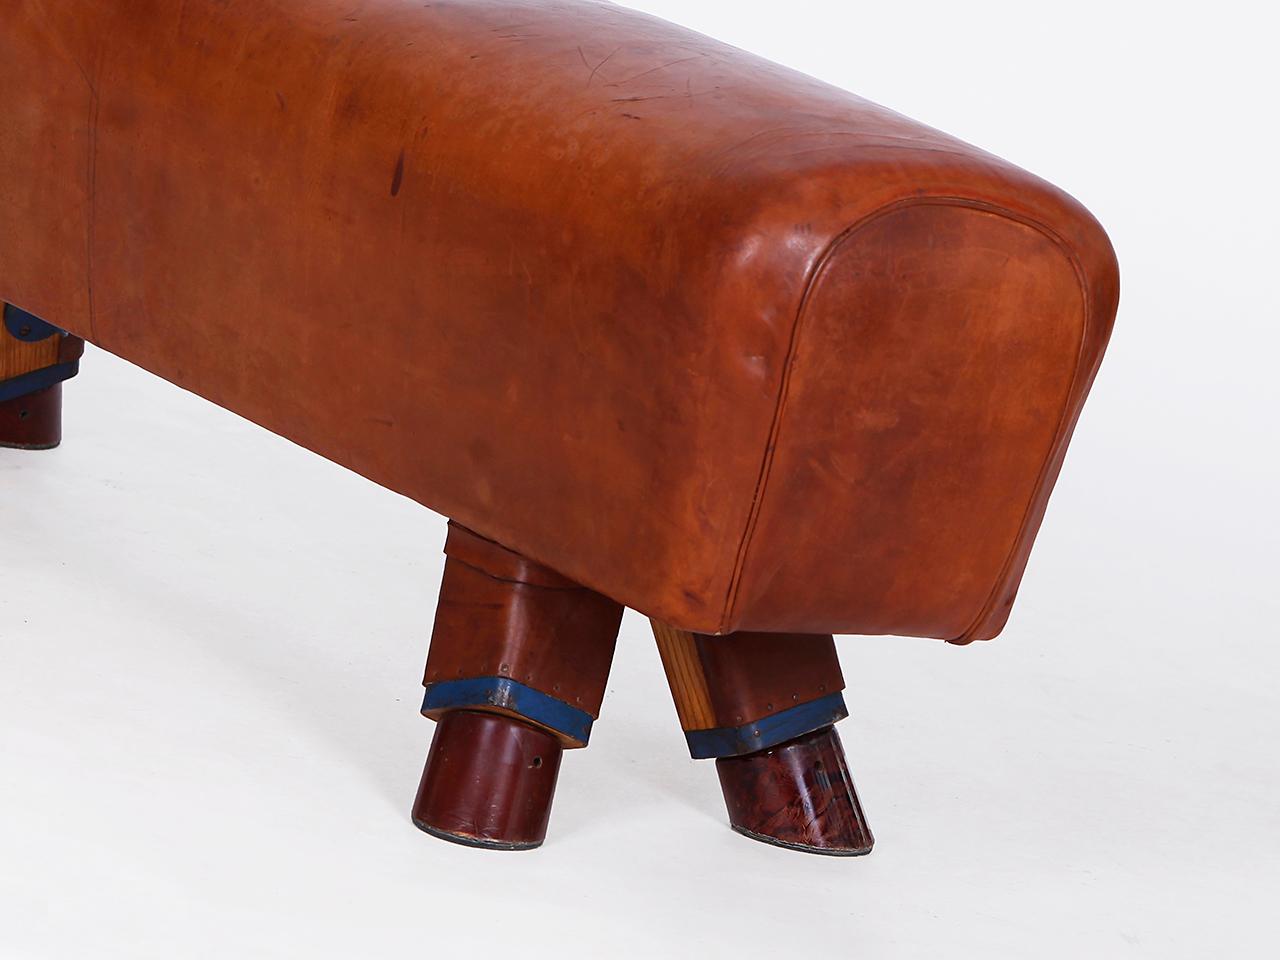 Gymnastic Leather Pommel Horse Bench Top, 1930s For Sale 2